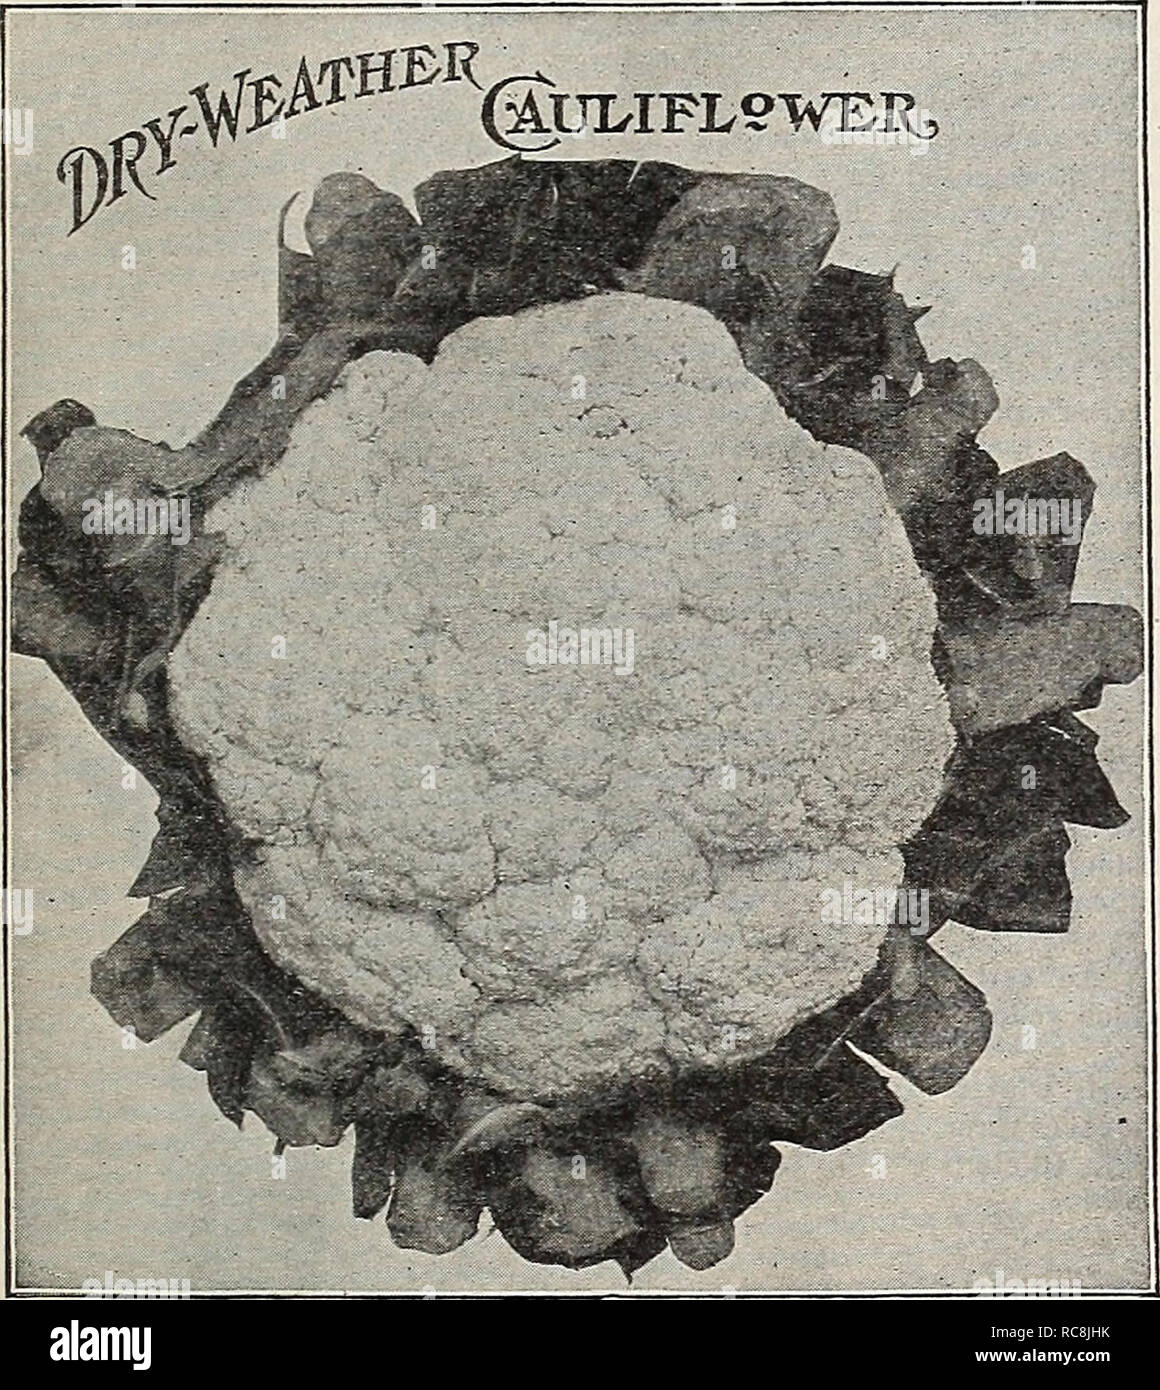 . Dreer's garden book 1932. Seeds Catalogs; Nursery stock Catalogs; Gardening Equipment and supplies Catalogs; Flowers Seeds Catalogs; Vegetables Seeds Catalogs; Fruit Seeds Catalogs. v RELIABLE VEGETABLE SEEM yPHMELPHM 19 Chou-fleur, Fr. Coliflor, Sp. CAULIFLOWER Blumenkohl, Ger. One ounce of seed will produce about 2000 plants. CULTURE —For earliest Cauliflower, raise plants by sowing in hotbed or greenhouse during January or February, and transplant to flats or cold frames, 2 or 3 inches apart each way. Set in open ground as soon in spring as the land can be put in good order. Soil to be a  Stock Photo